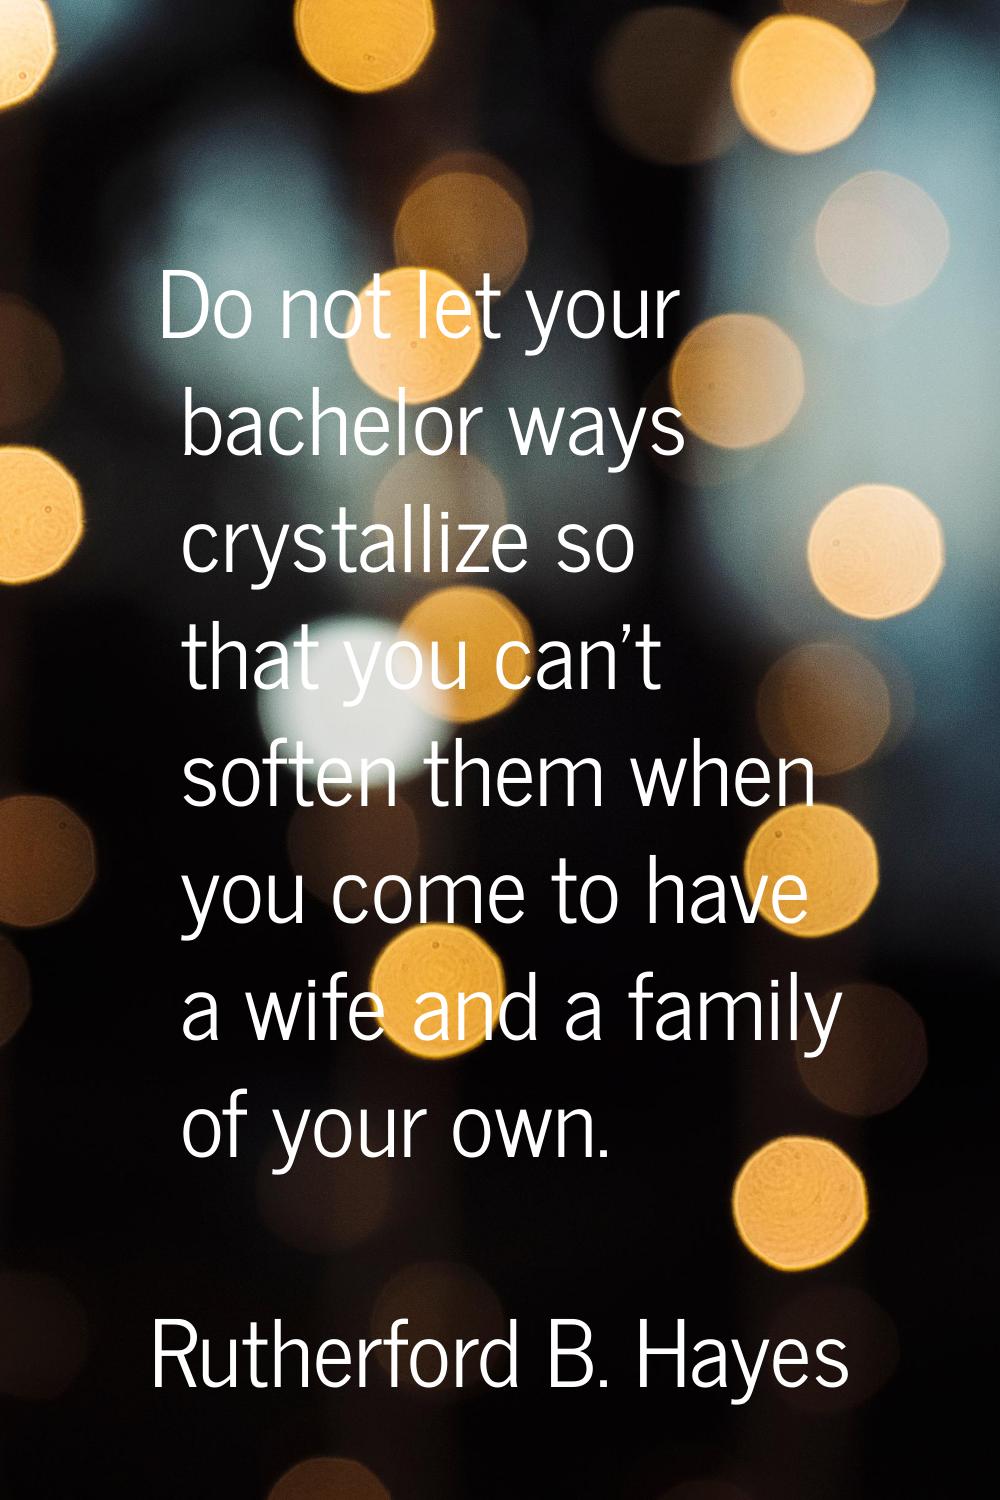 Do not let your bachelor ways crystallize so that you can't soften them when you come to have a wif